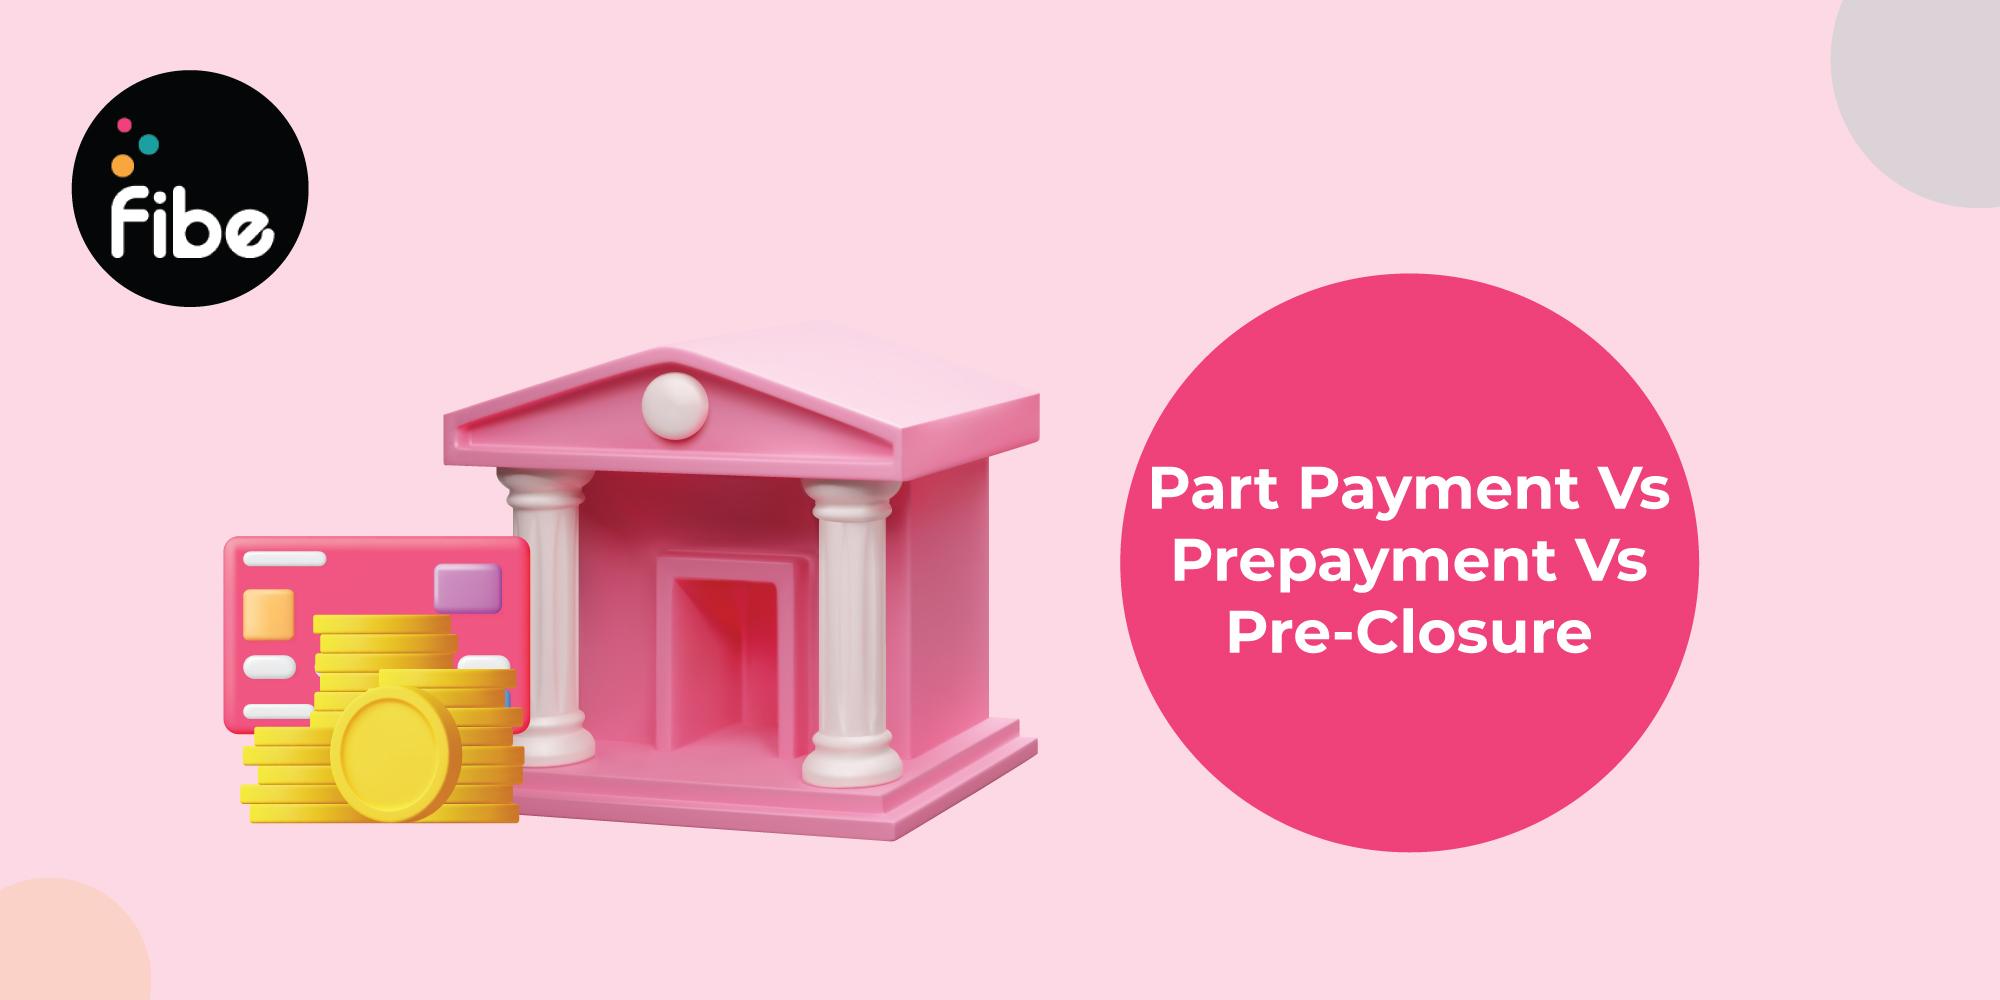 Prepayment, Pre-Closure and Part Payment: Everything you need to know